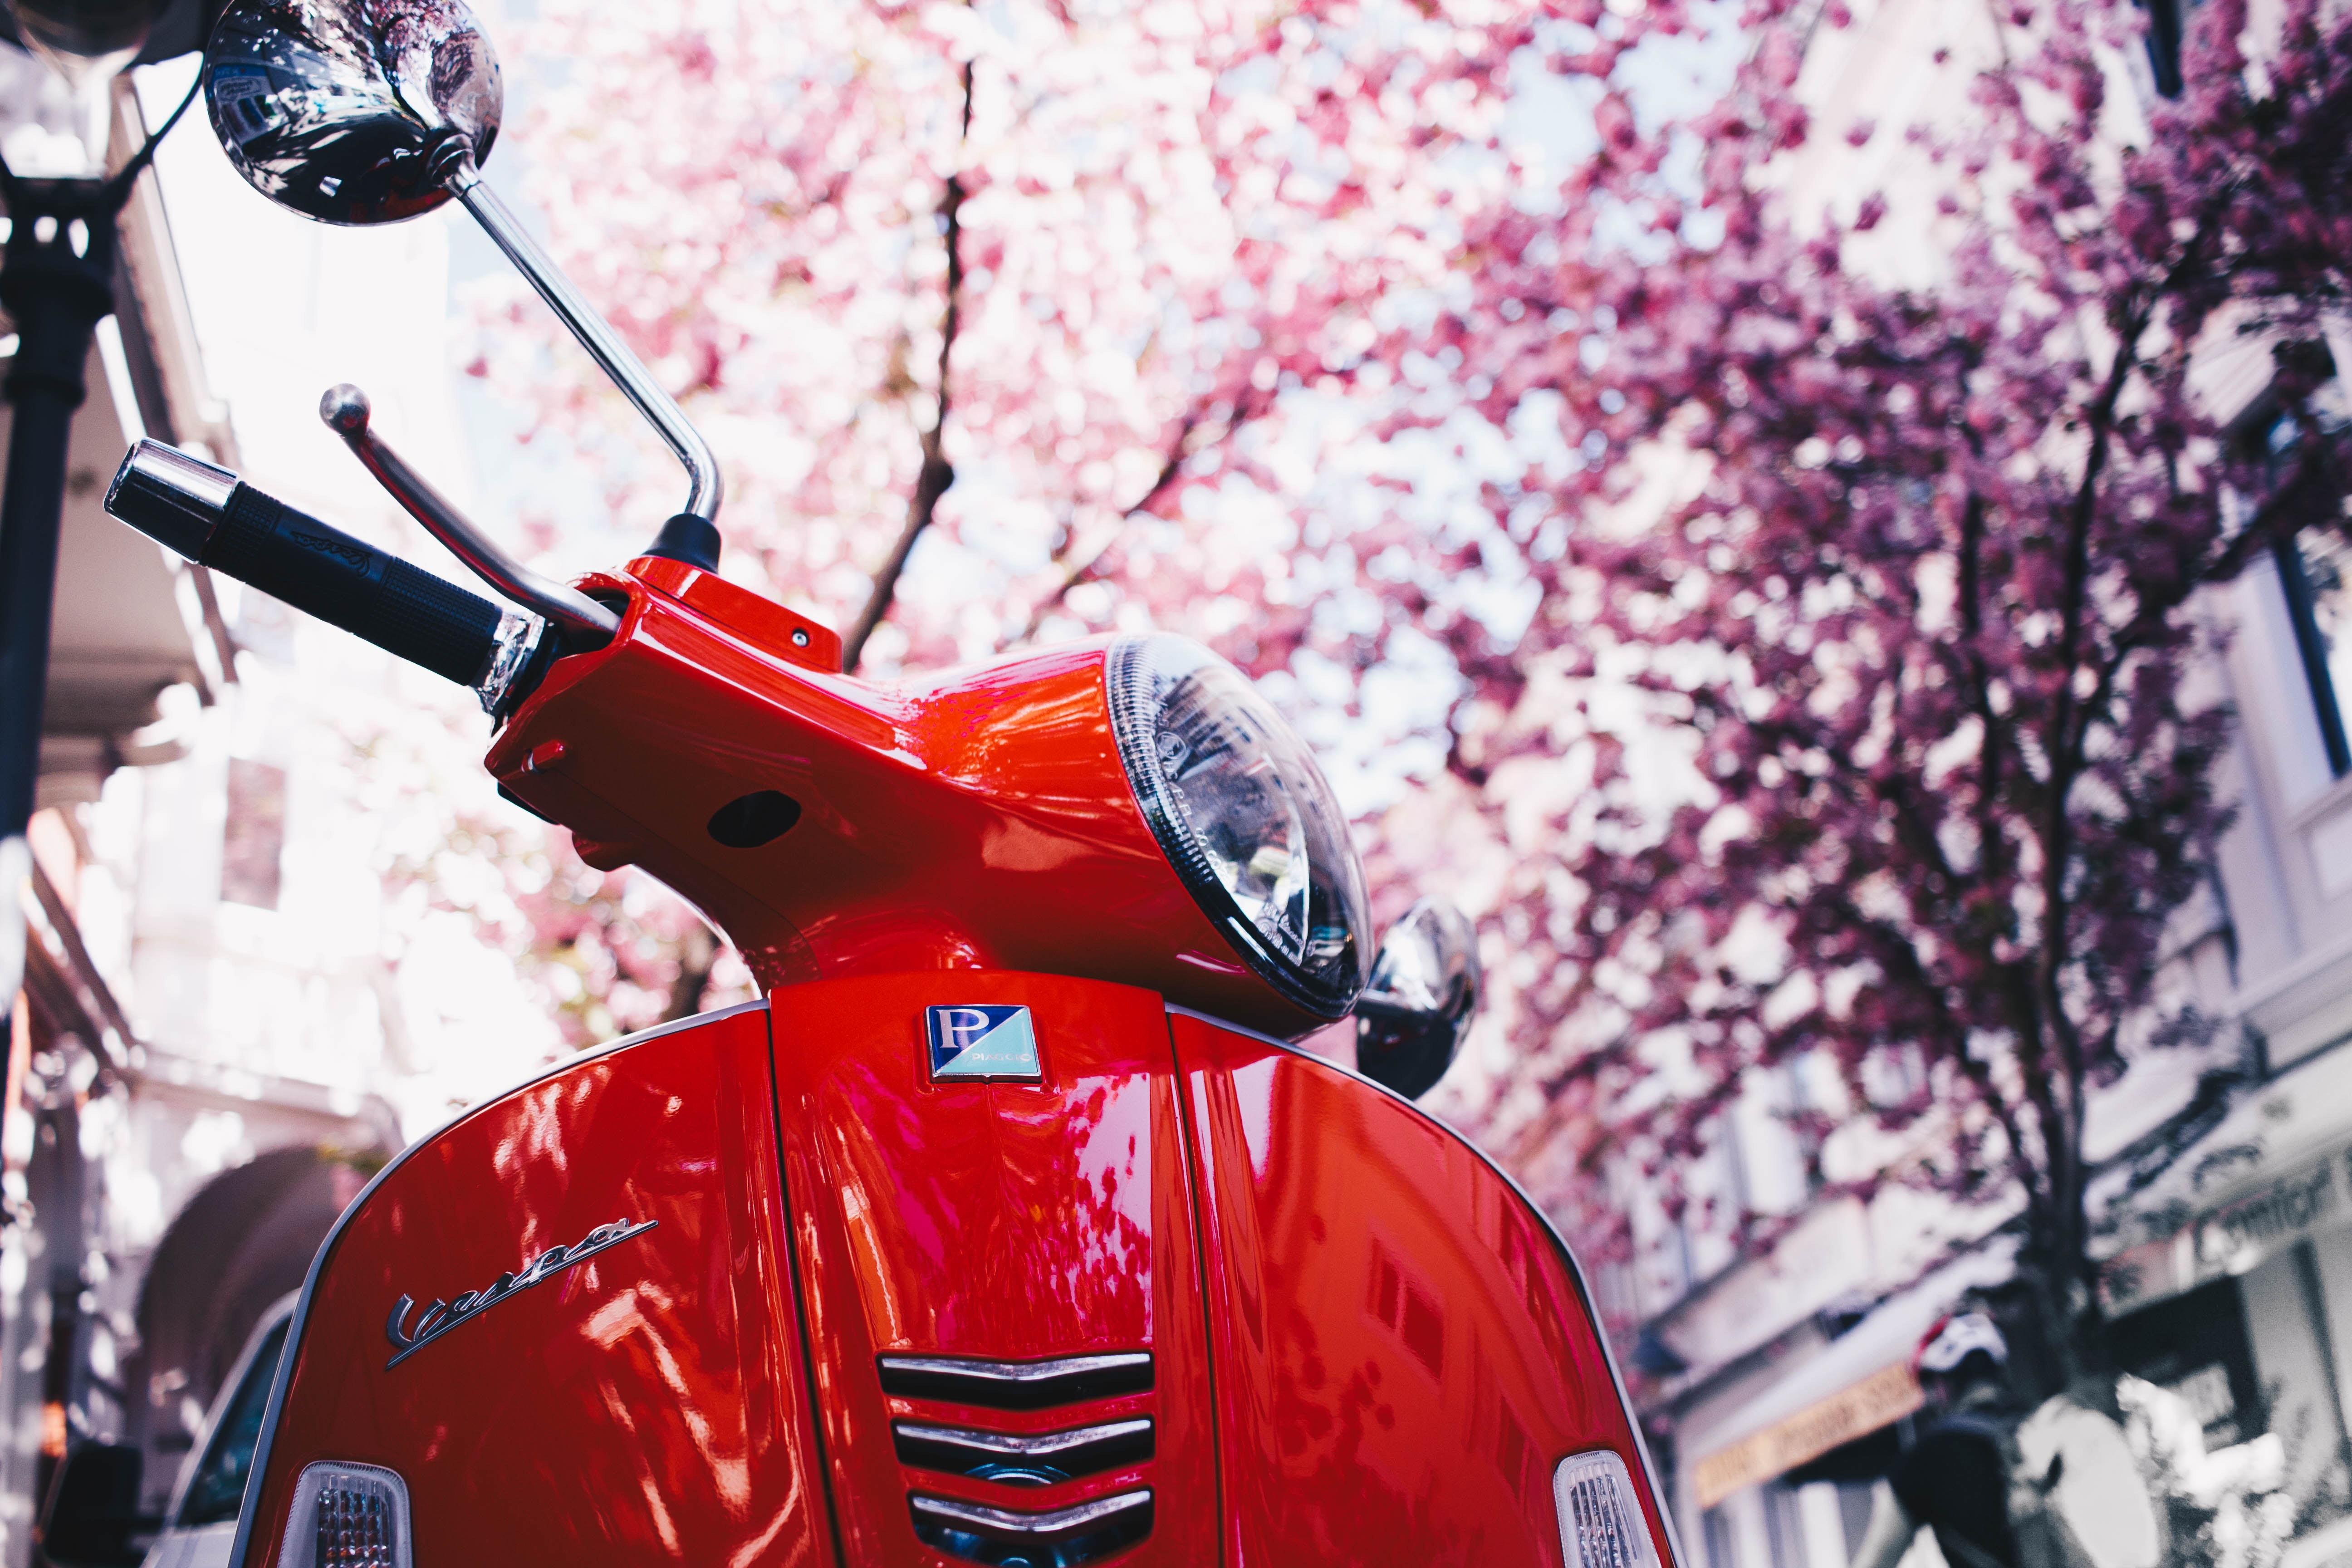 Selective focus photography of a red motor scooter under blooming trees